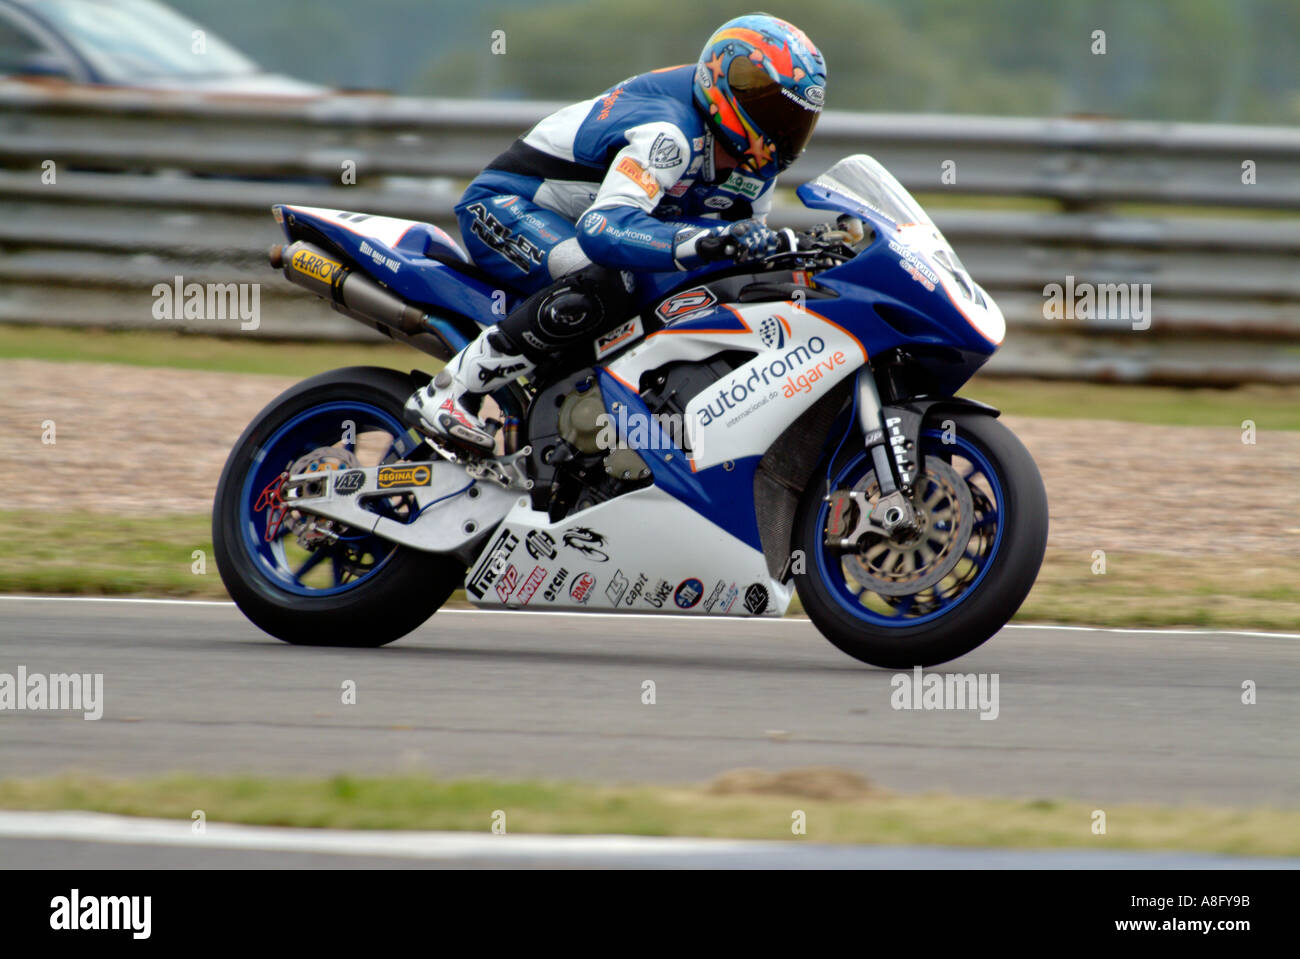 Miguel Praia at Silverstone on his Yamaha R1 Stock Photo